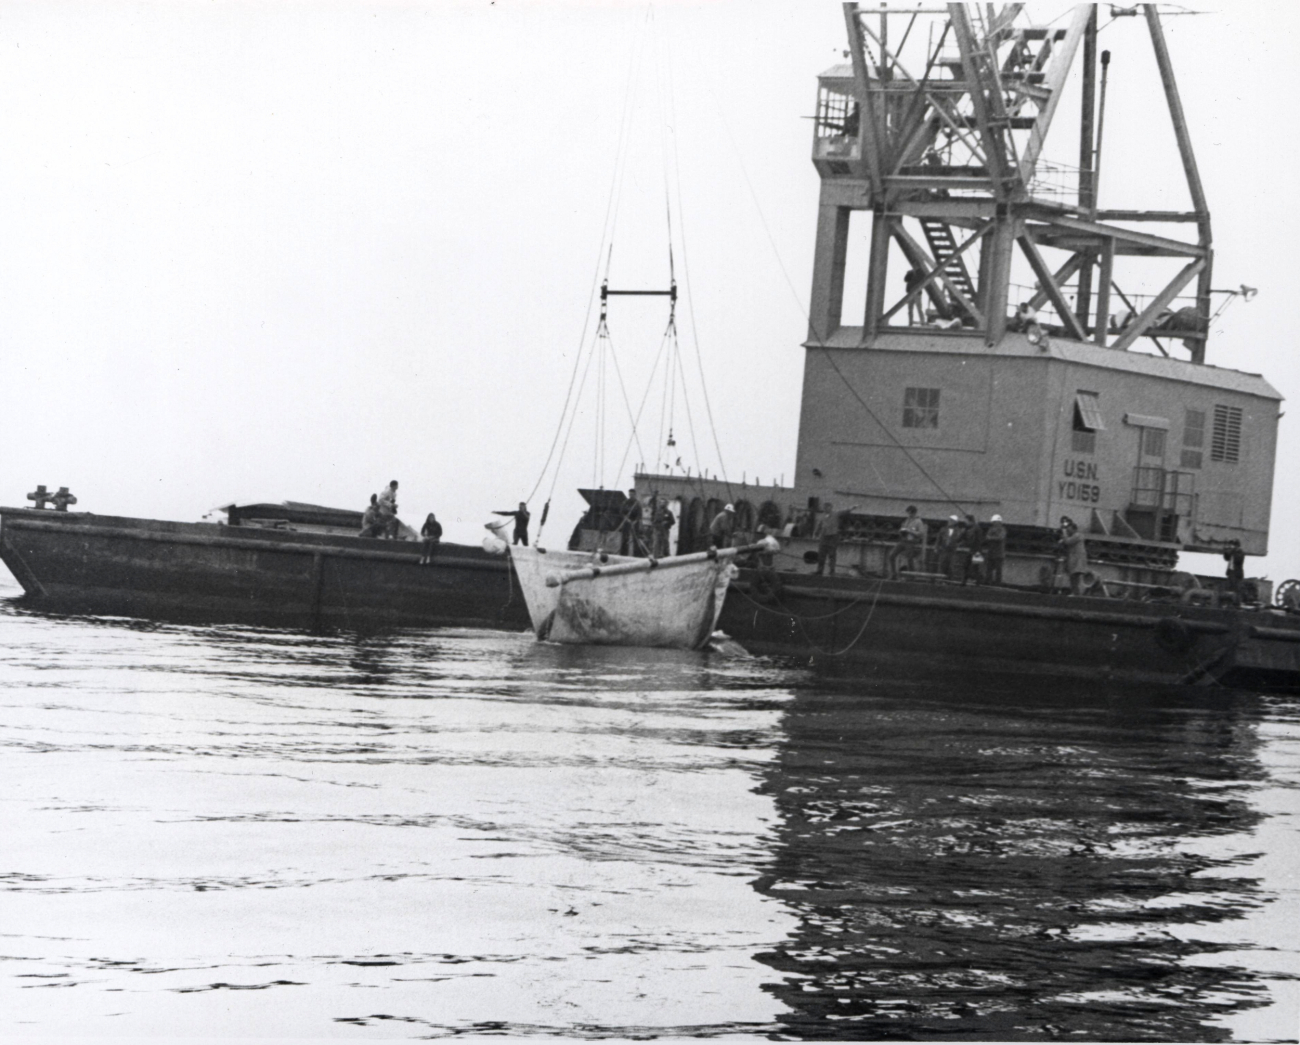 The 27-foot long Gigi is gently lowered into the sea after a year in captivity